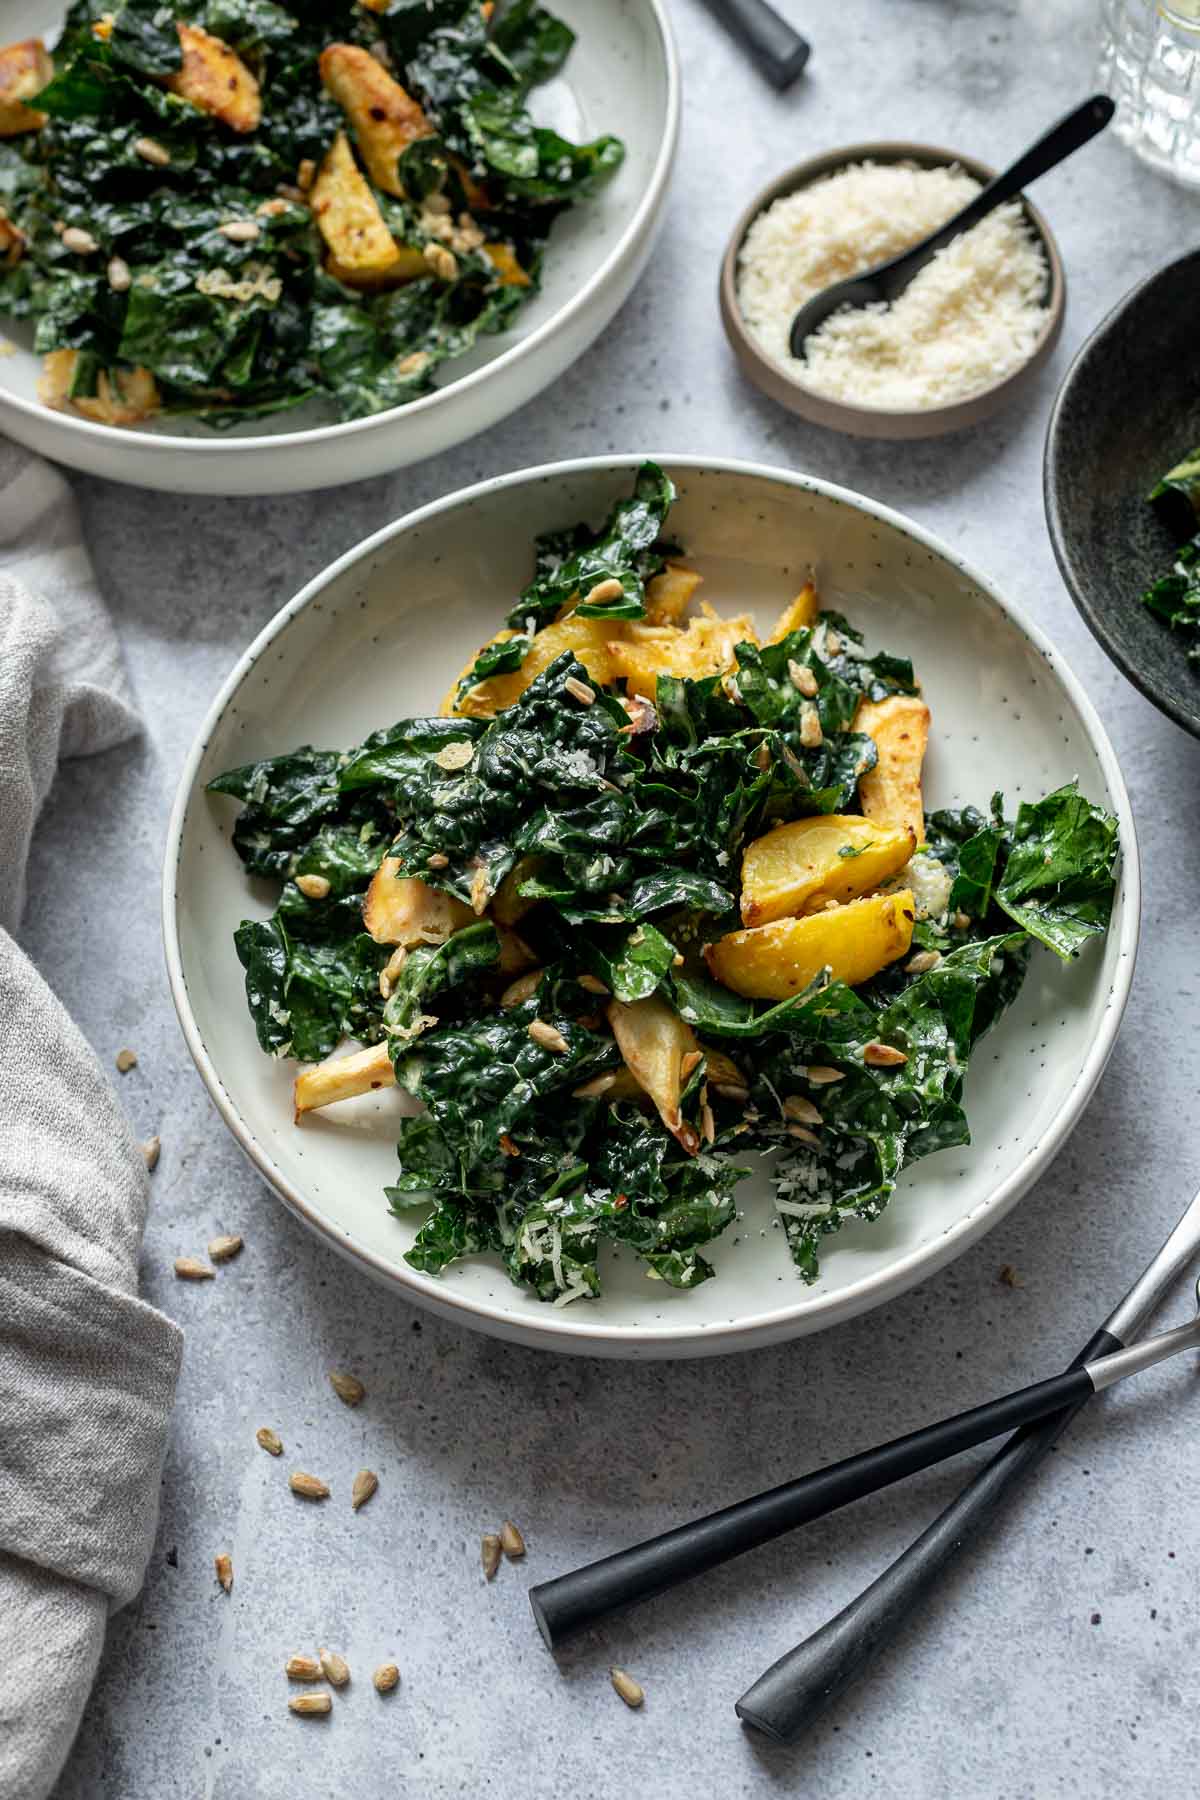 Fall Salad with Tuscan Kale and Parmesan-Roasted Potatoes